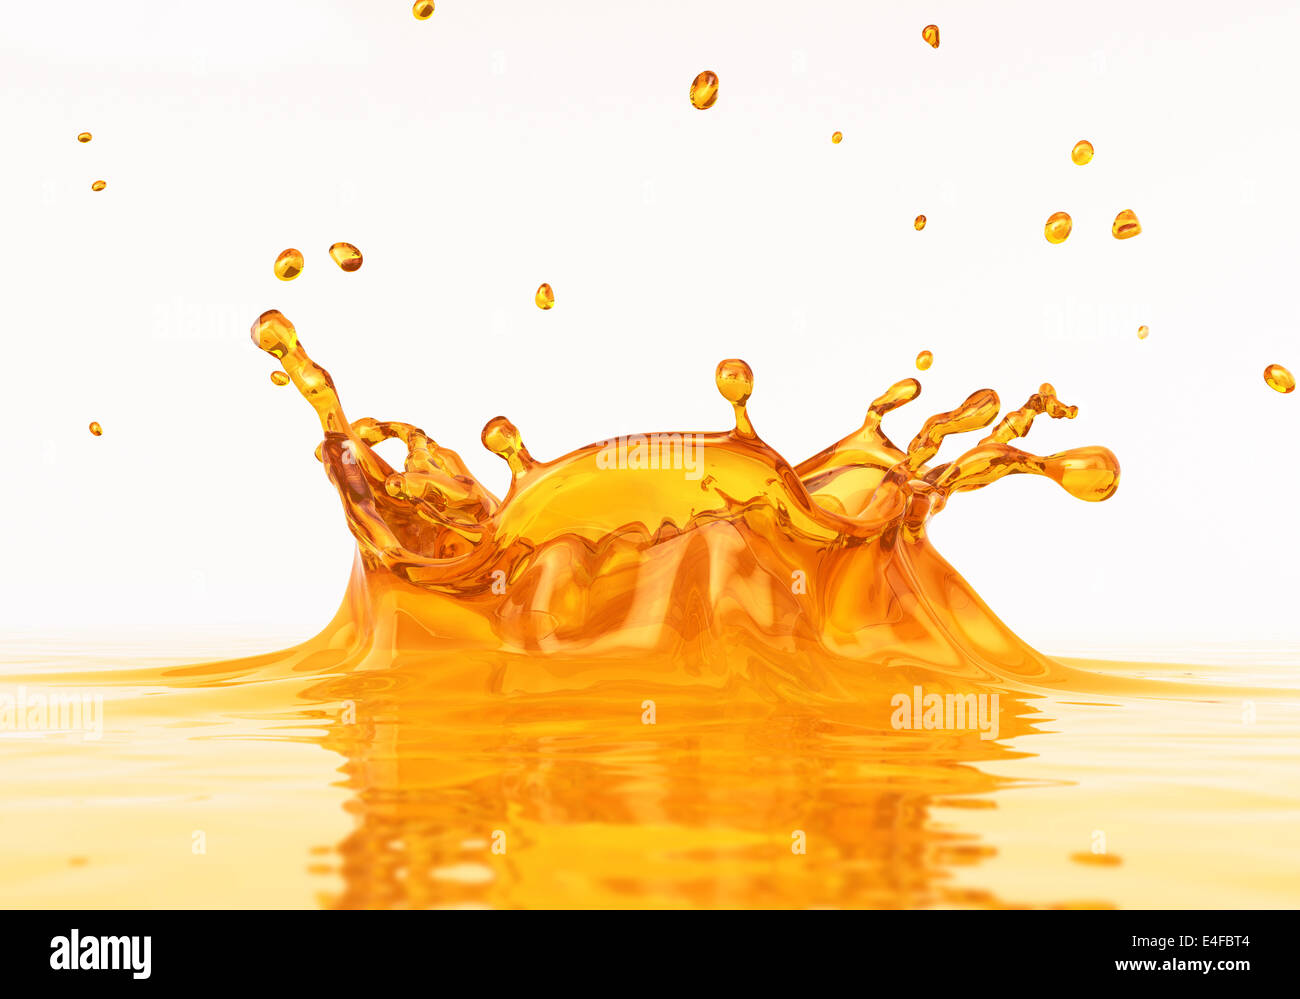 Liquid clear orange juice splash close up. On white background. Clipping path included. Stock Photo